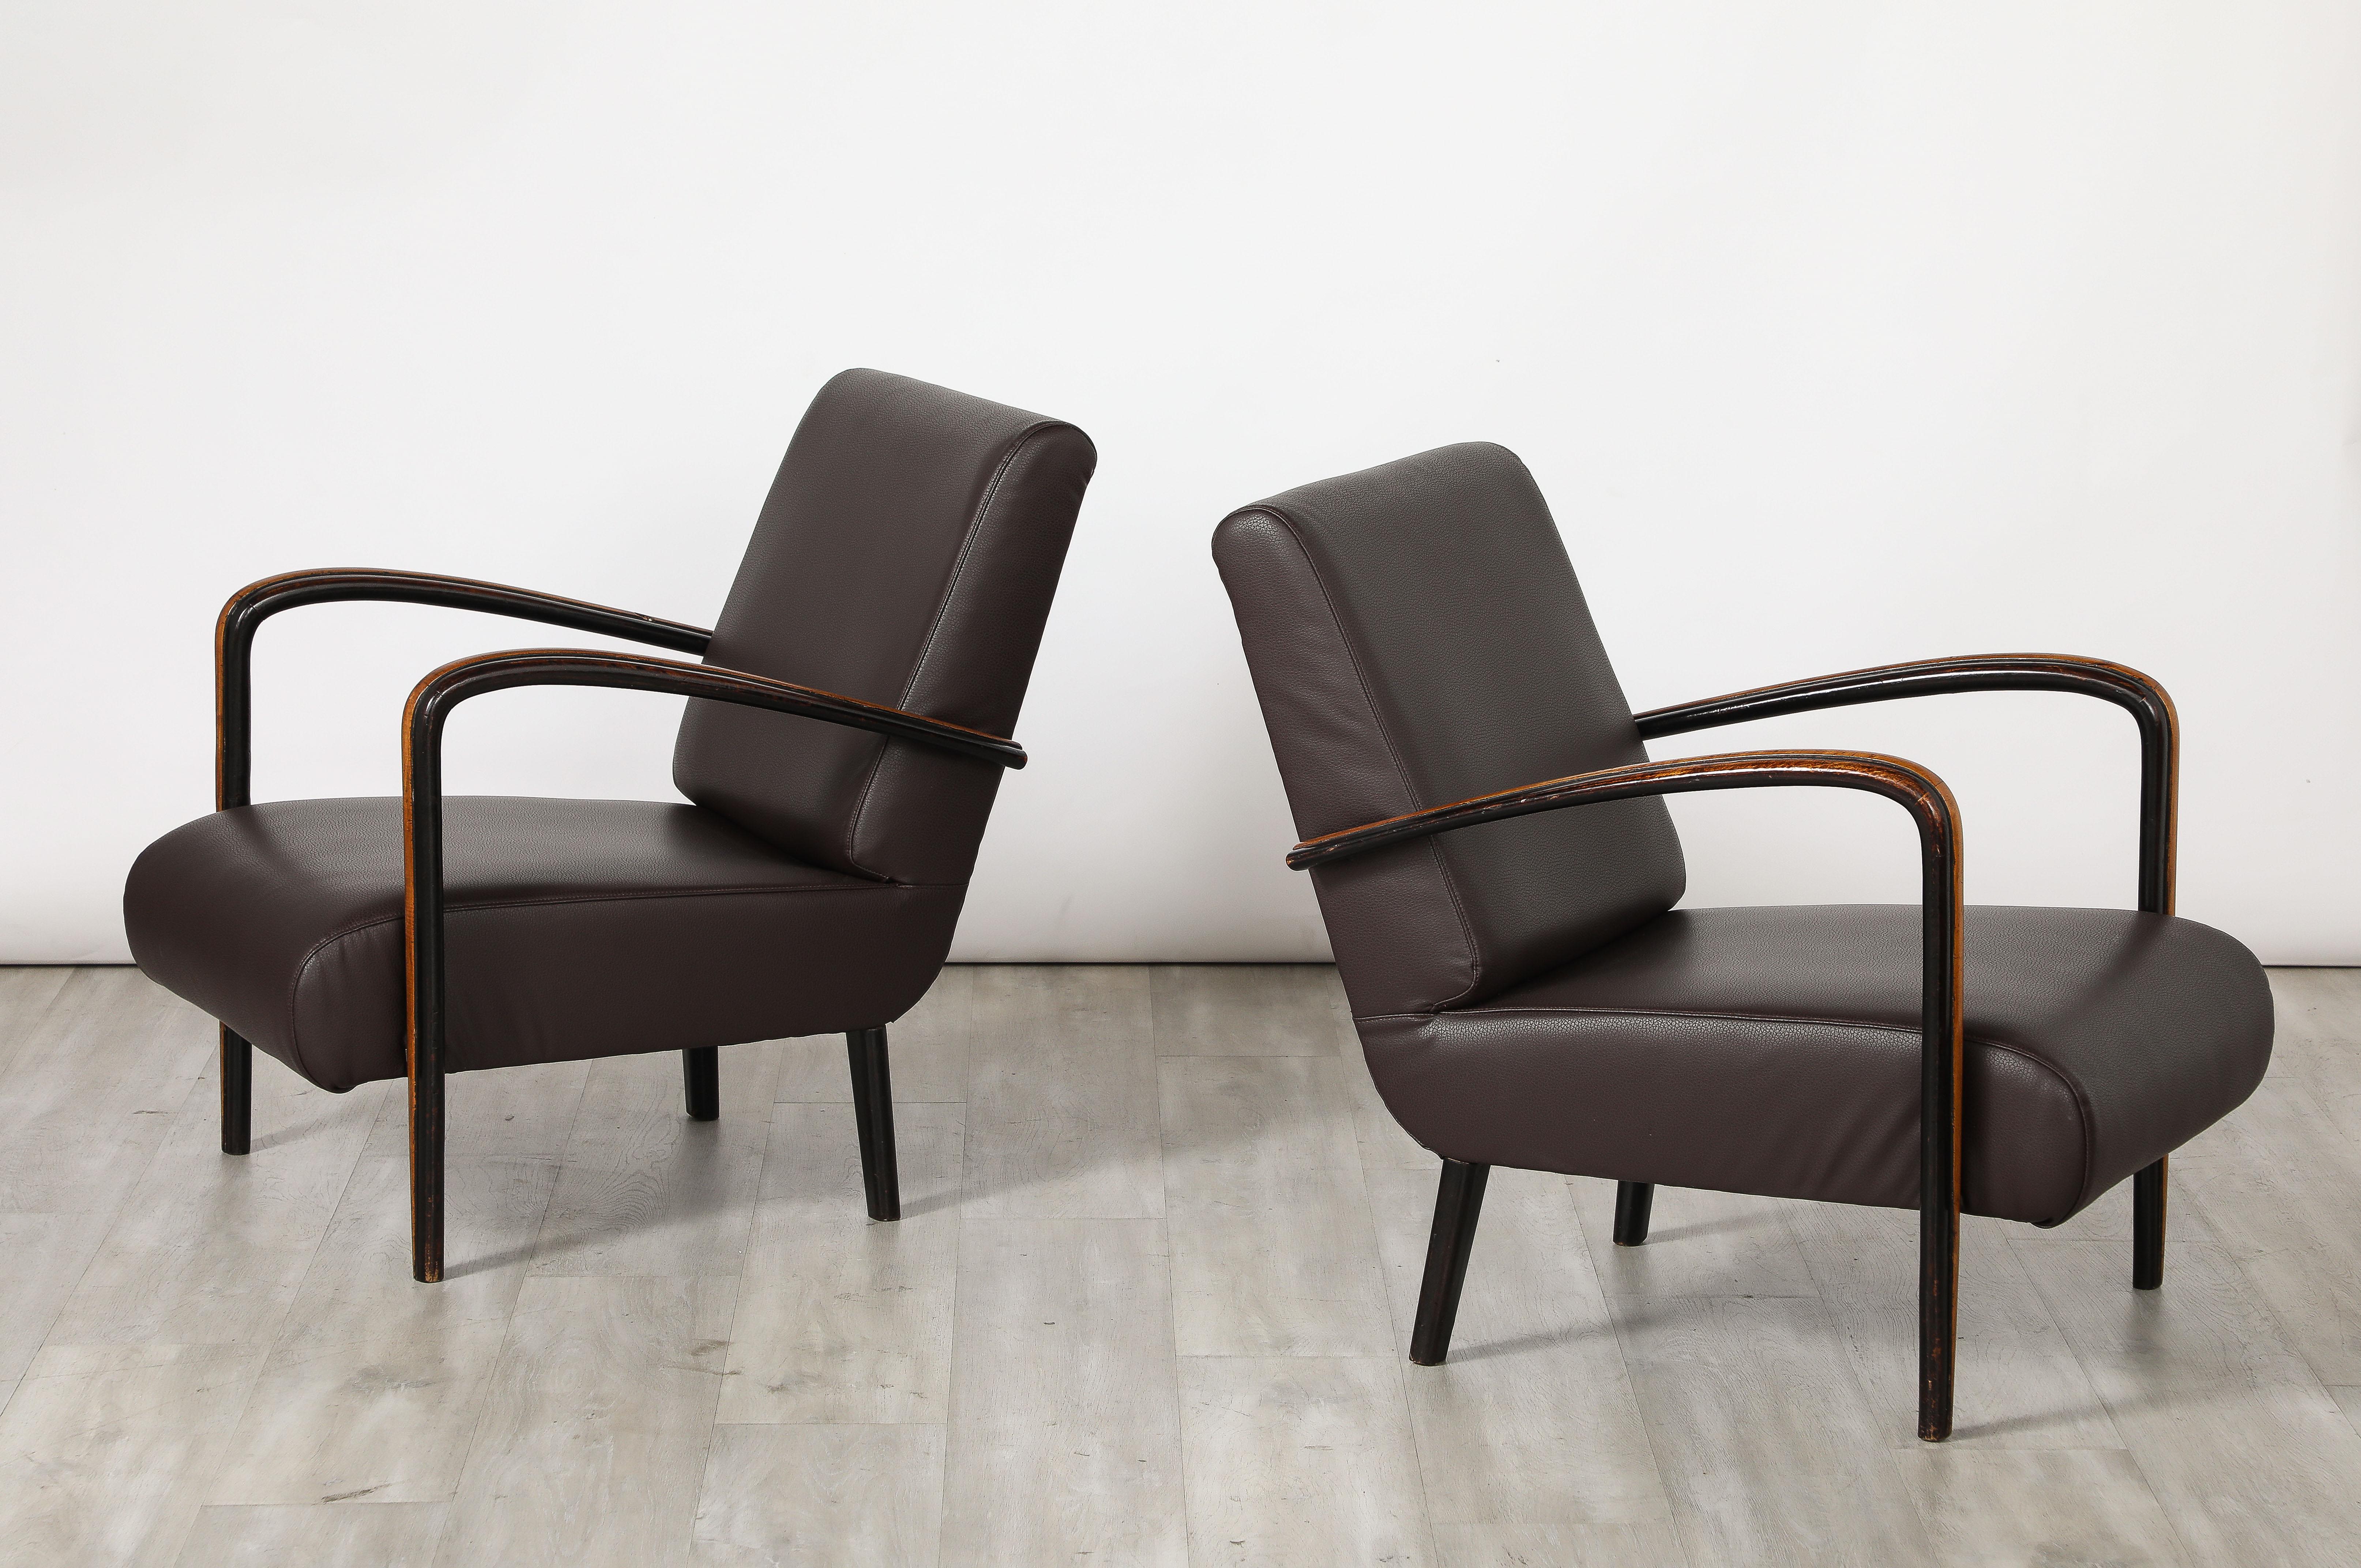 Leather Pair of Italian Modernist Lounge Chairs, Italy, circa 1940 For Sale